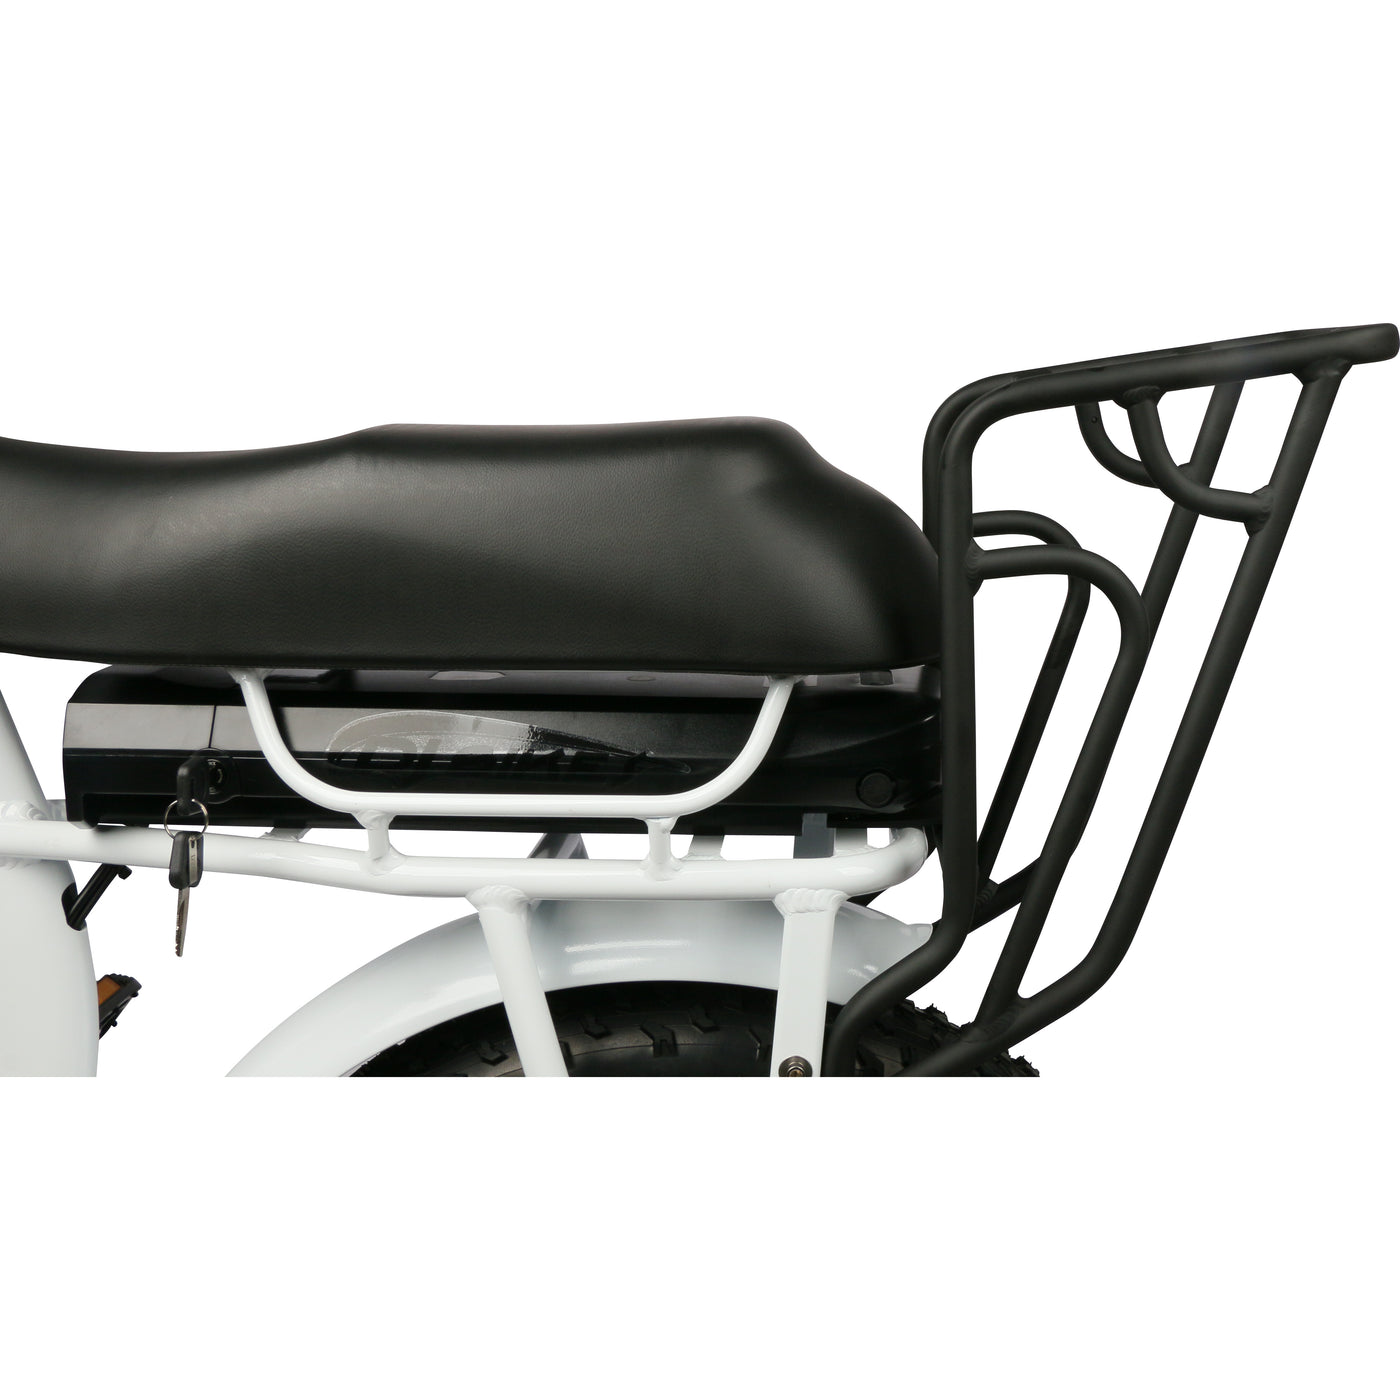 Redesigned DJ Super Bike Step Thru now sports a rear rack for your gear